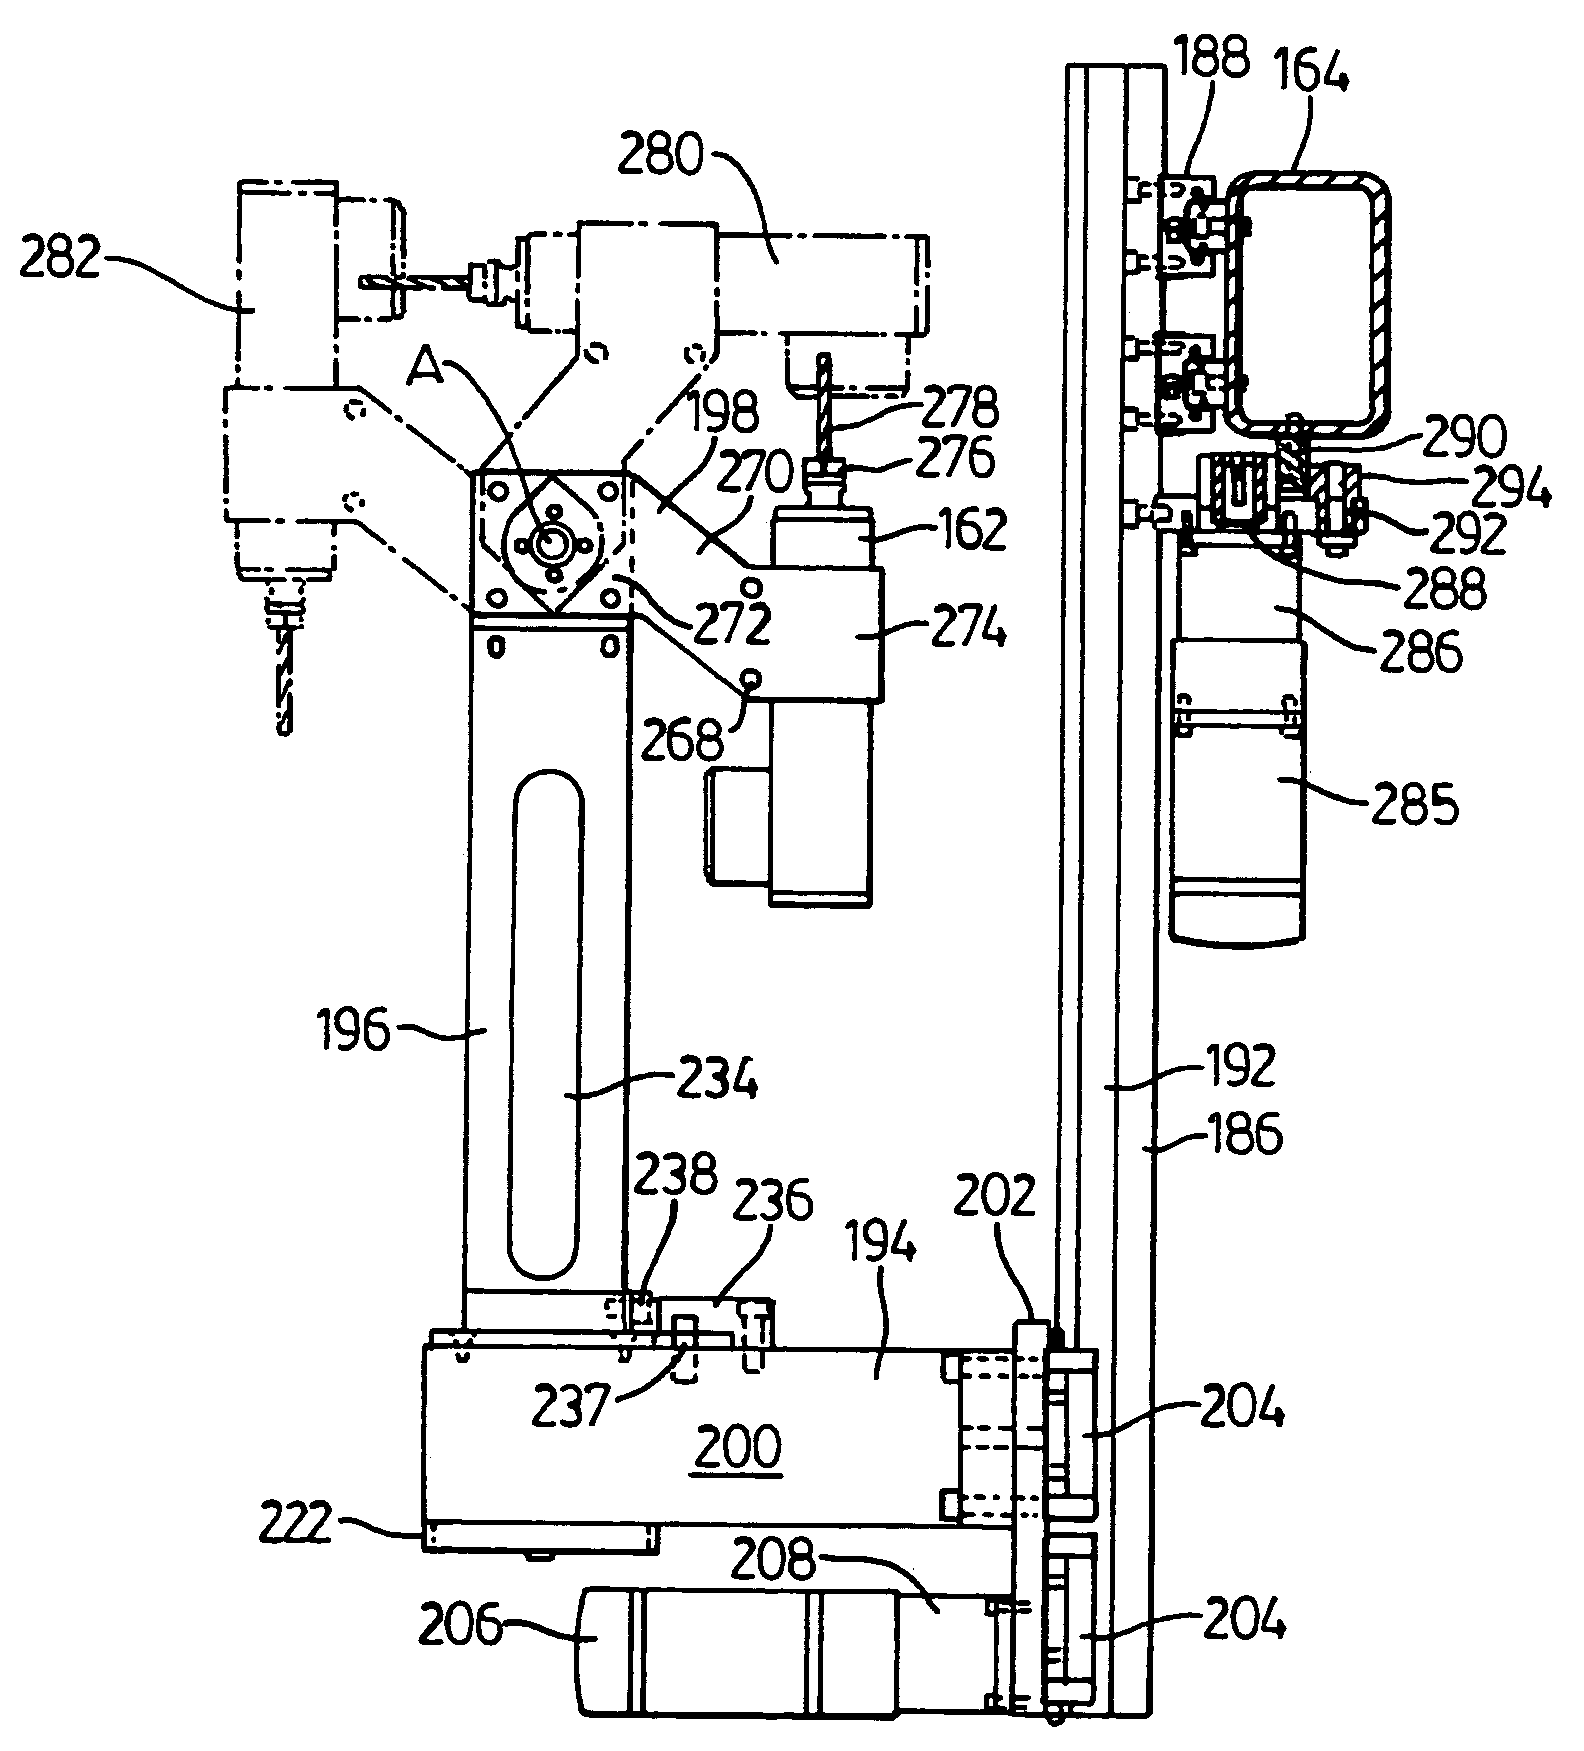 Apparatus and method for manufacturing plastic frameworks such as window frames